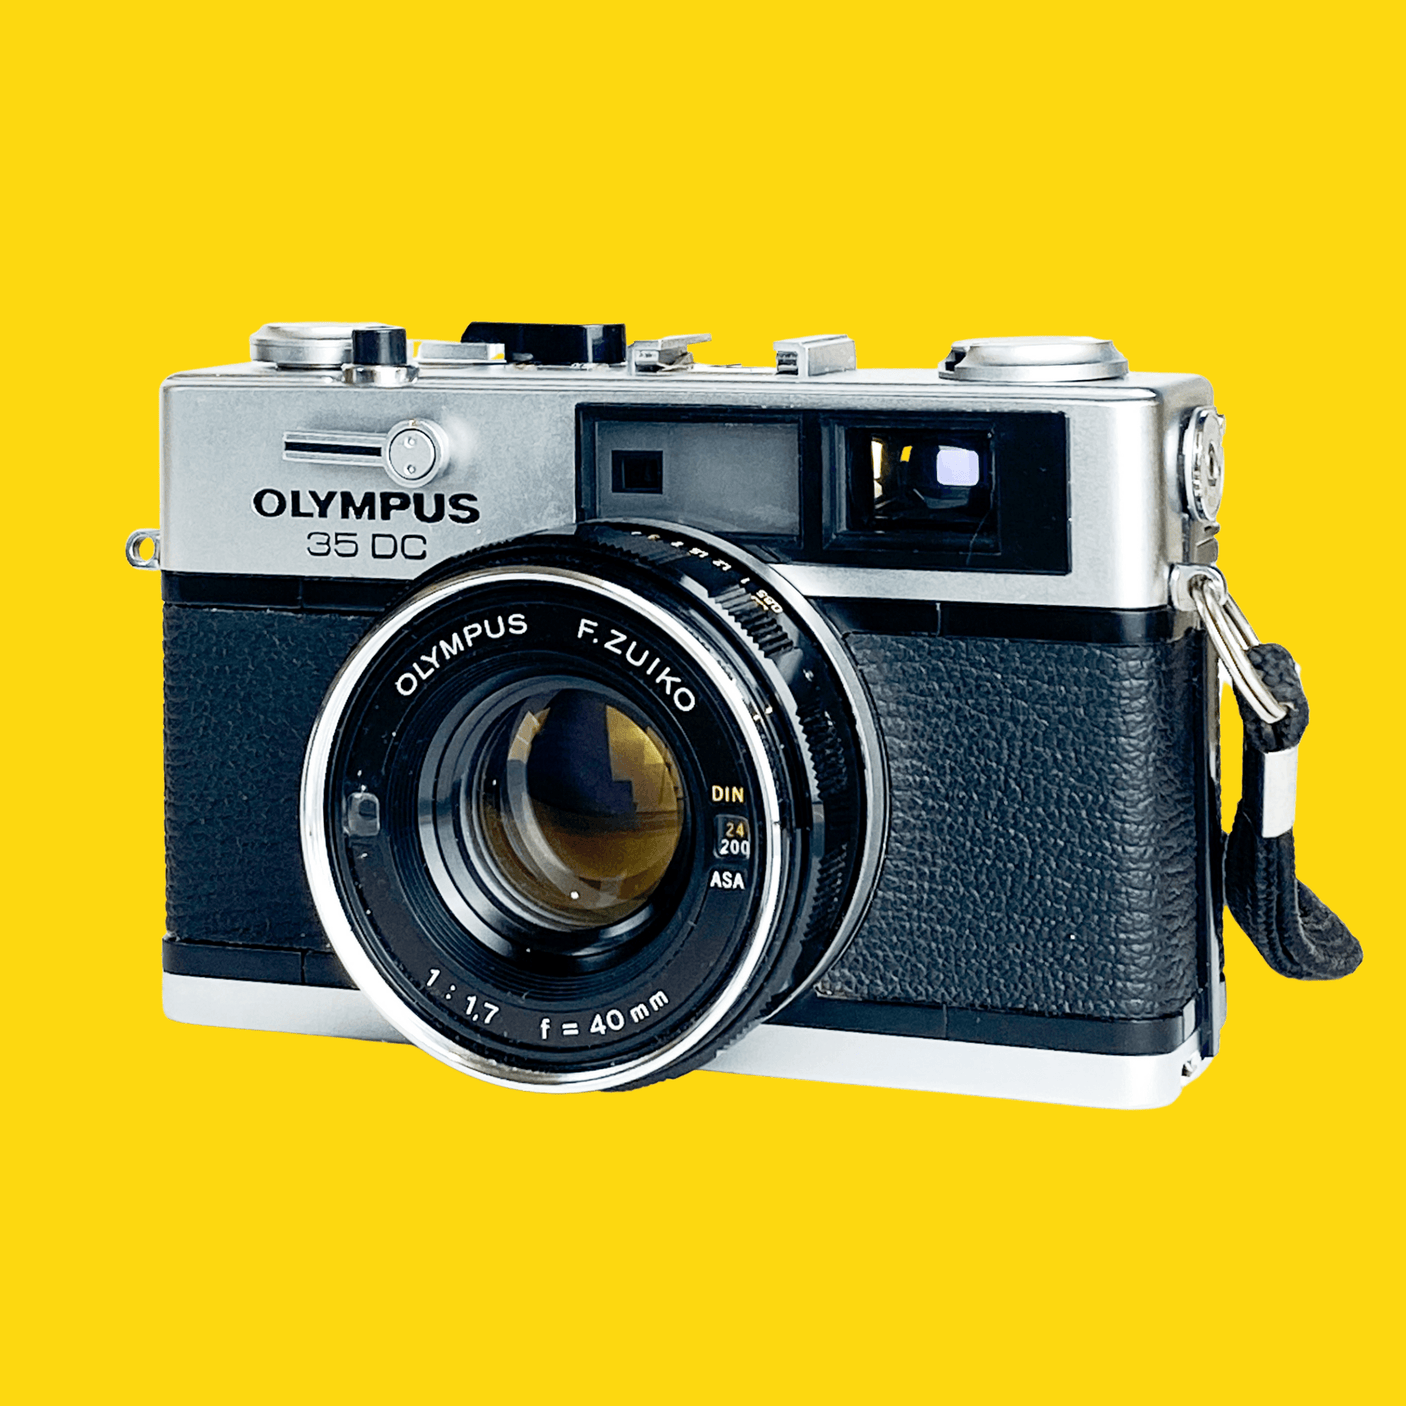 Olympus 35DC Point and Shoot 35mm Film Camera.